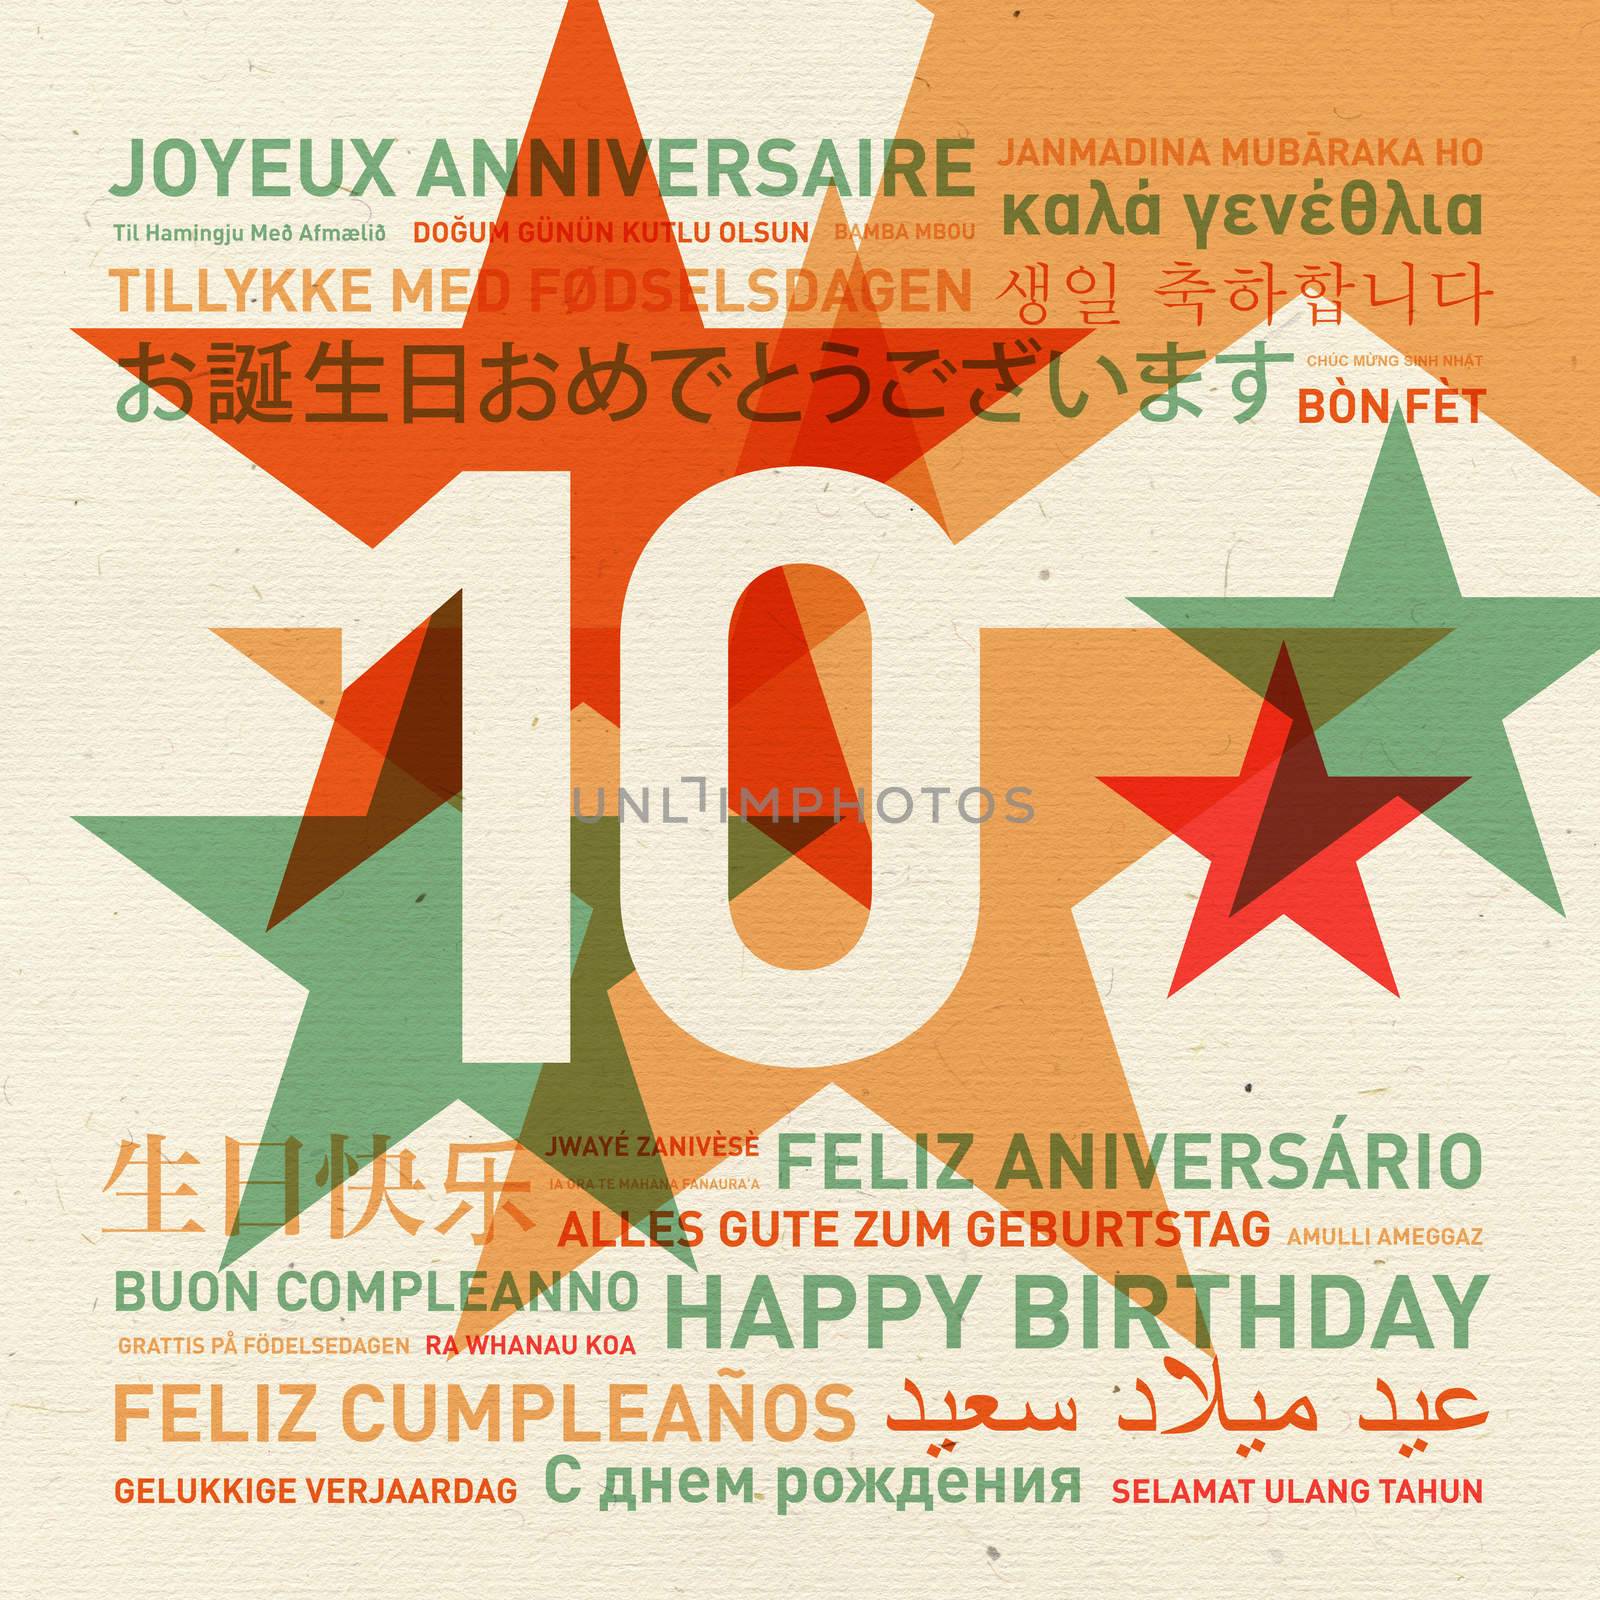 10th anniversary happy birthday from the world. Different languages celebration card